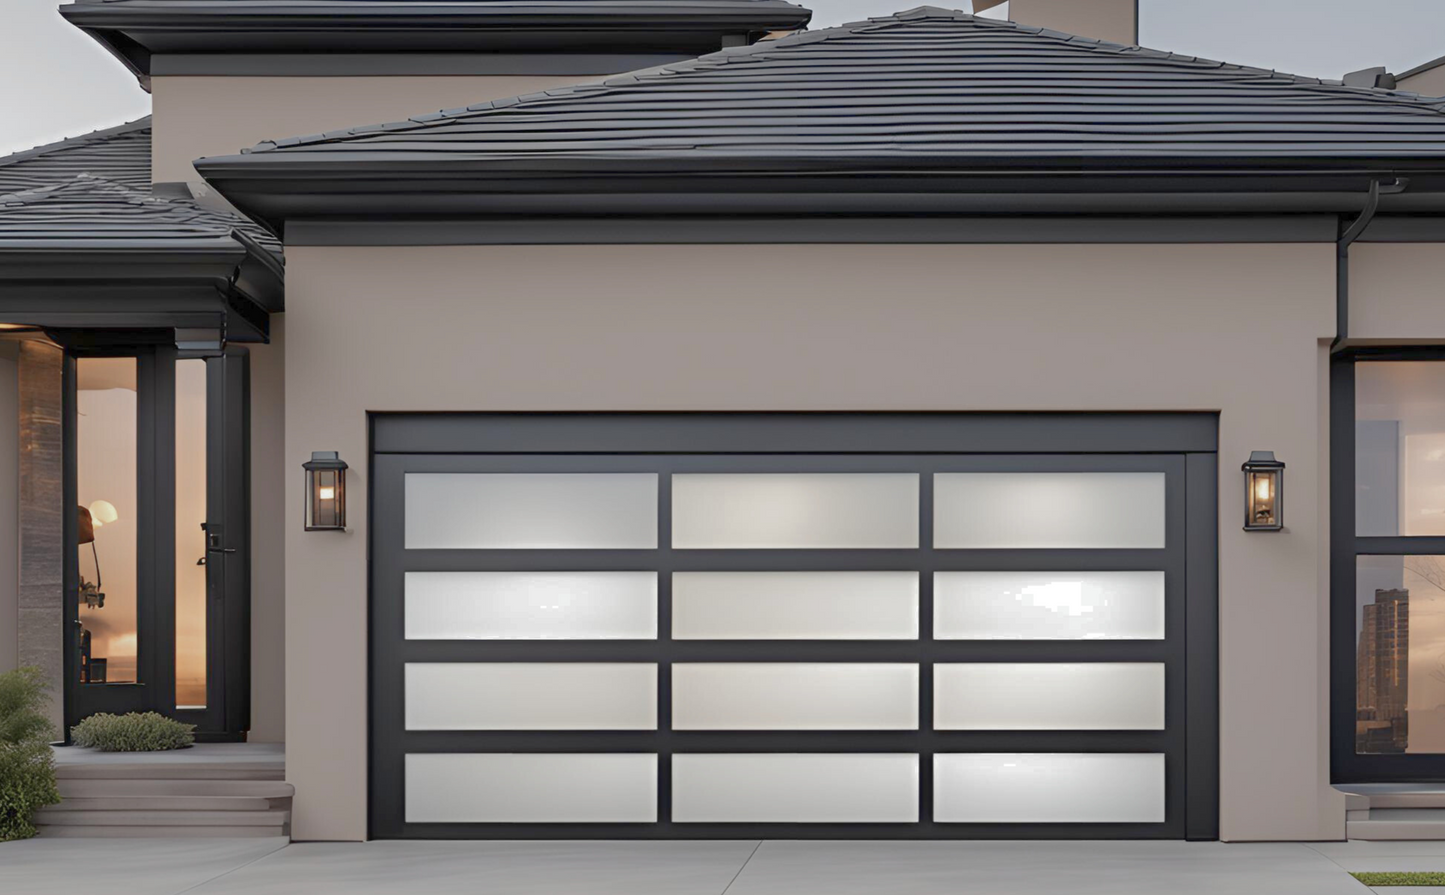 Modern matte black garage door with frosted glass panels on a contemporary home, featuring 4 panels and 3 window sections for a sleek and stylish look